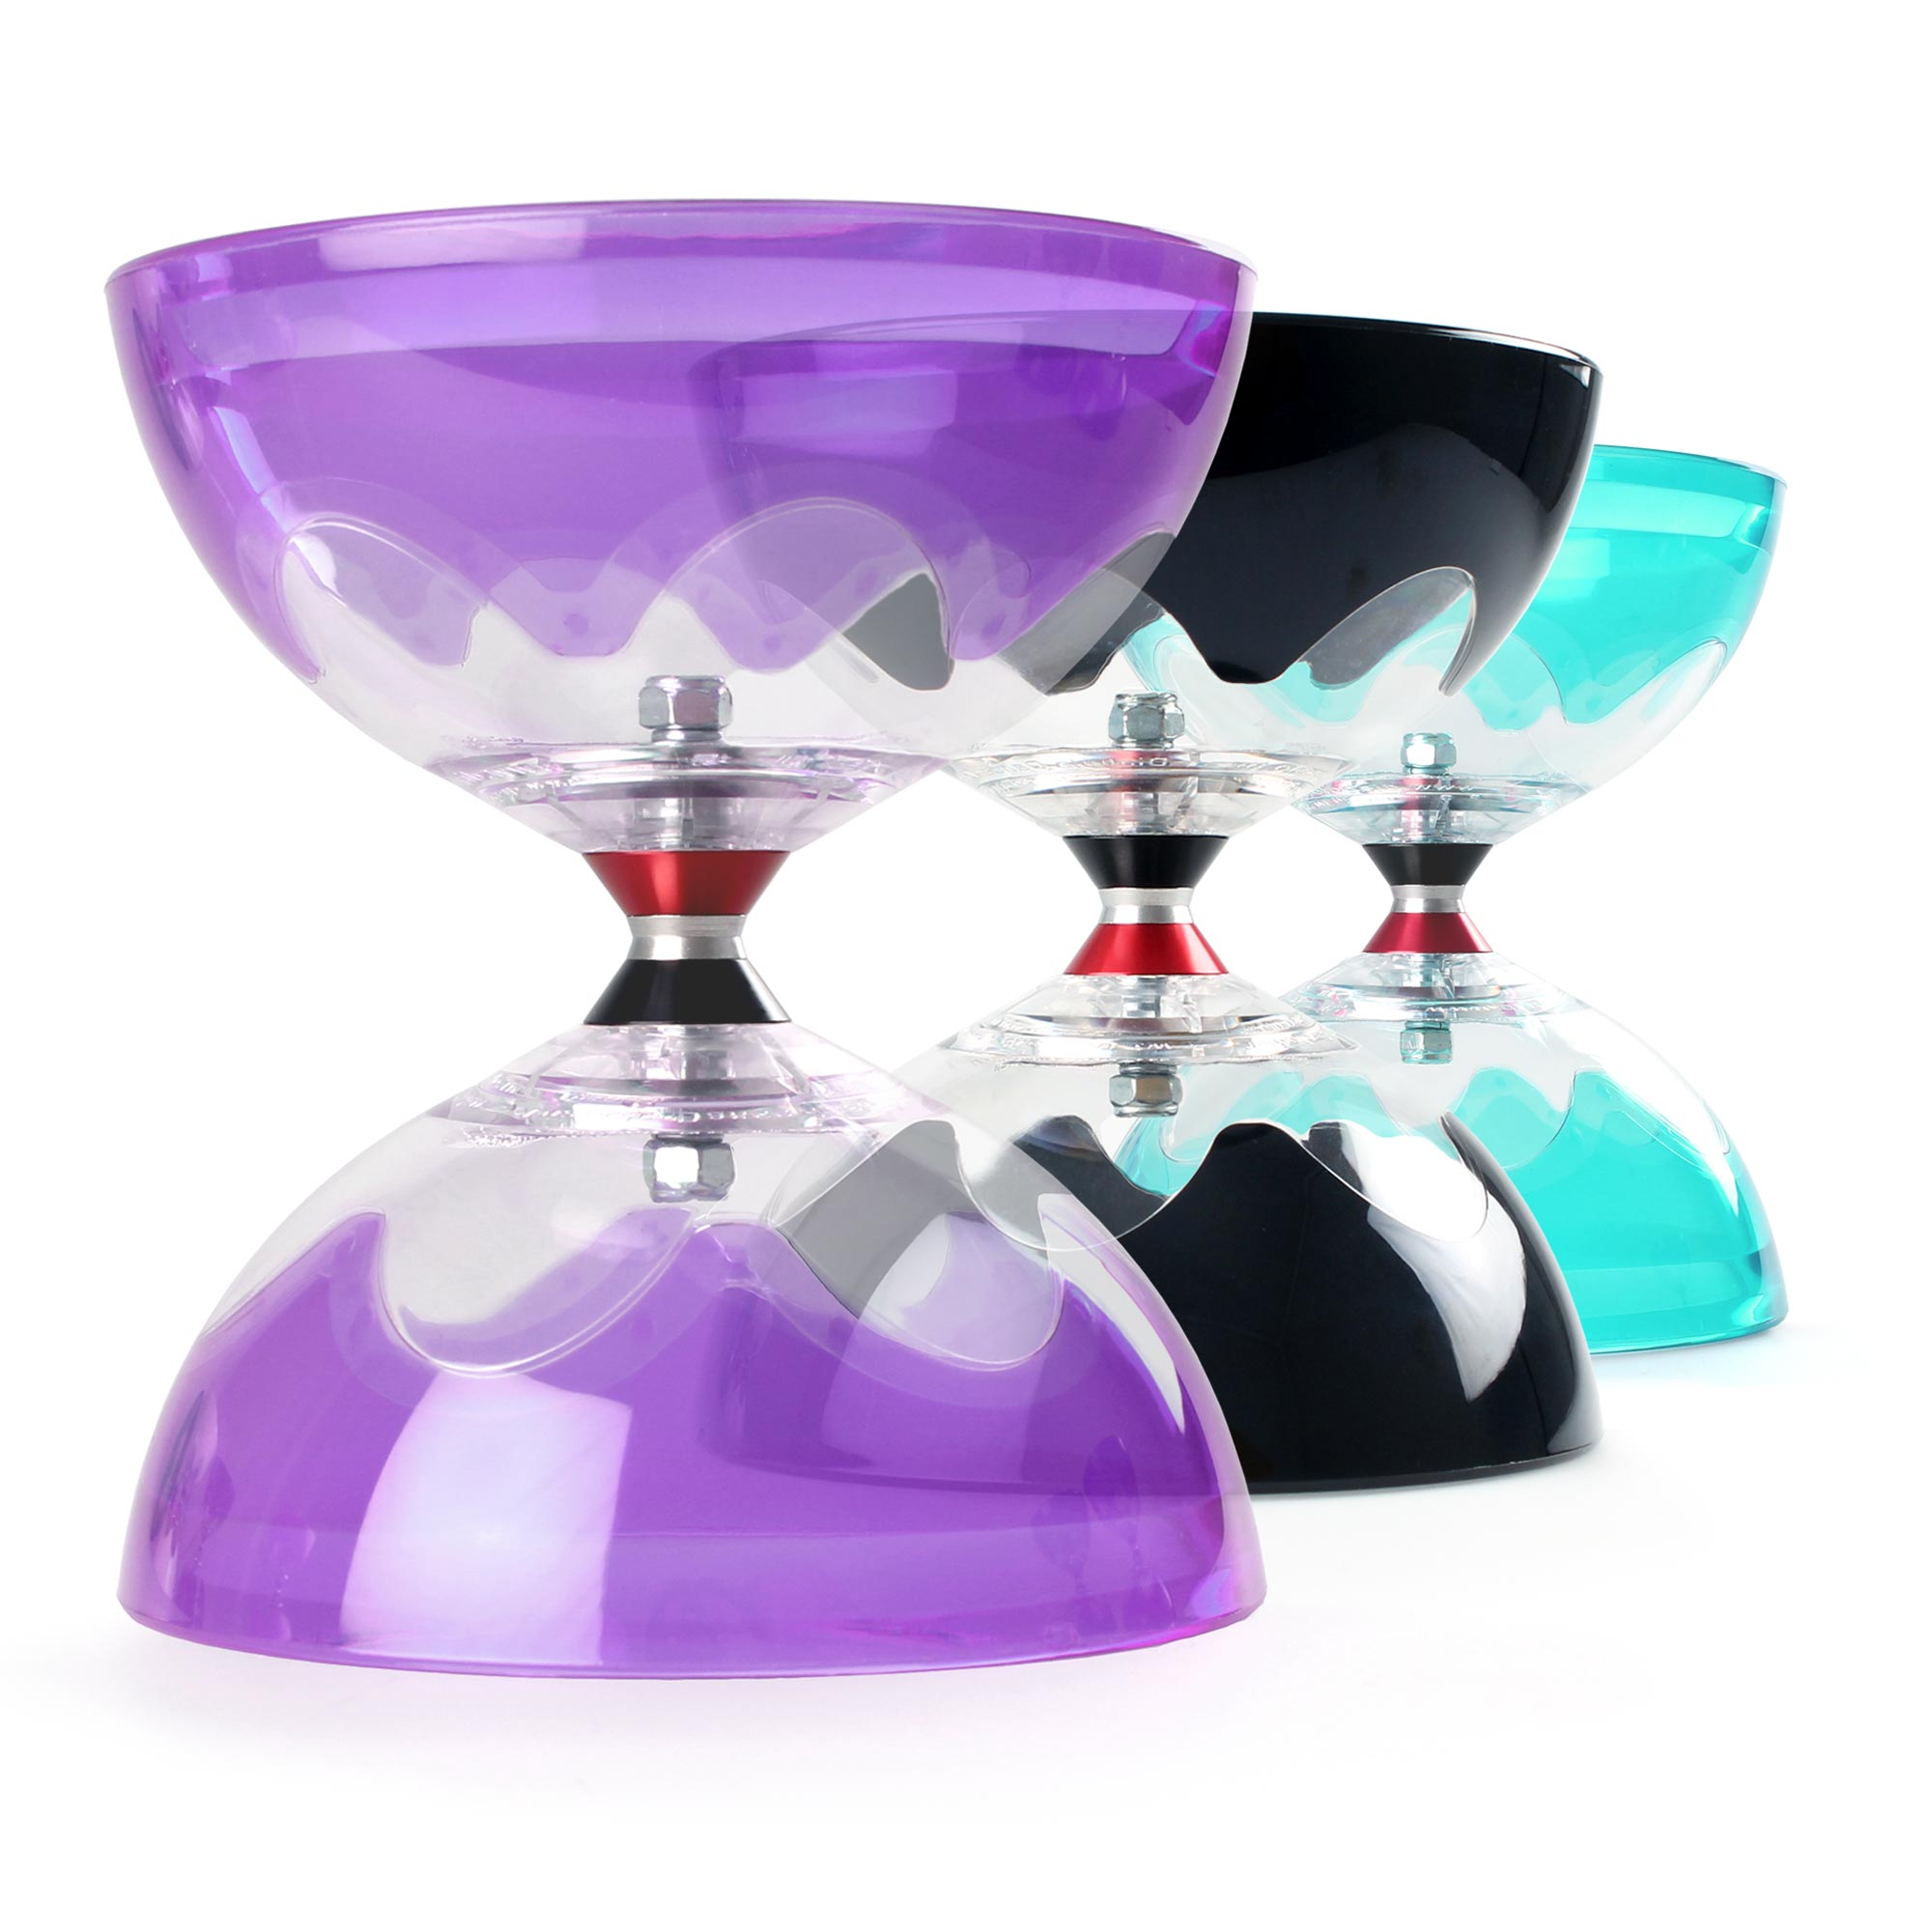 Purple, black and turquoise hyperspin diabolo